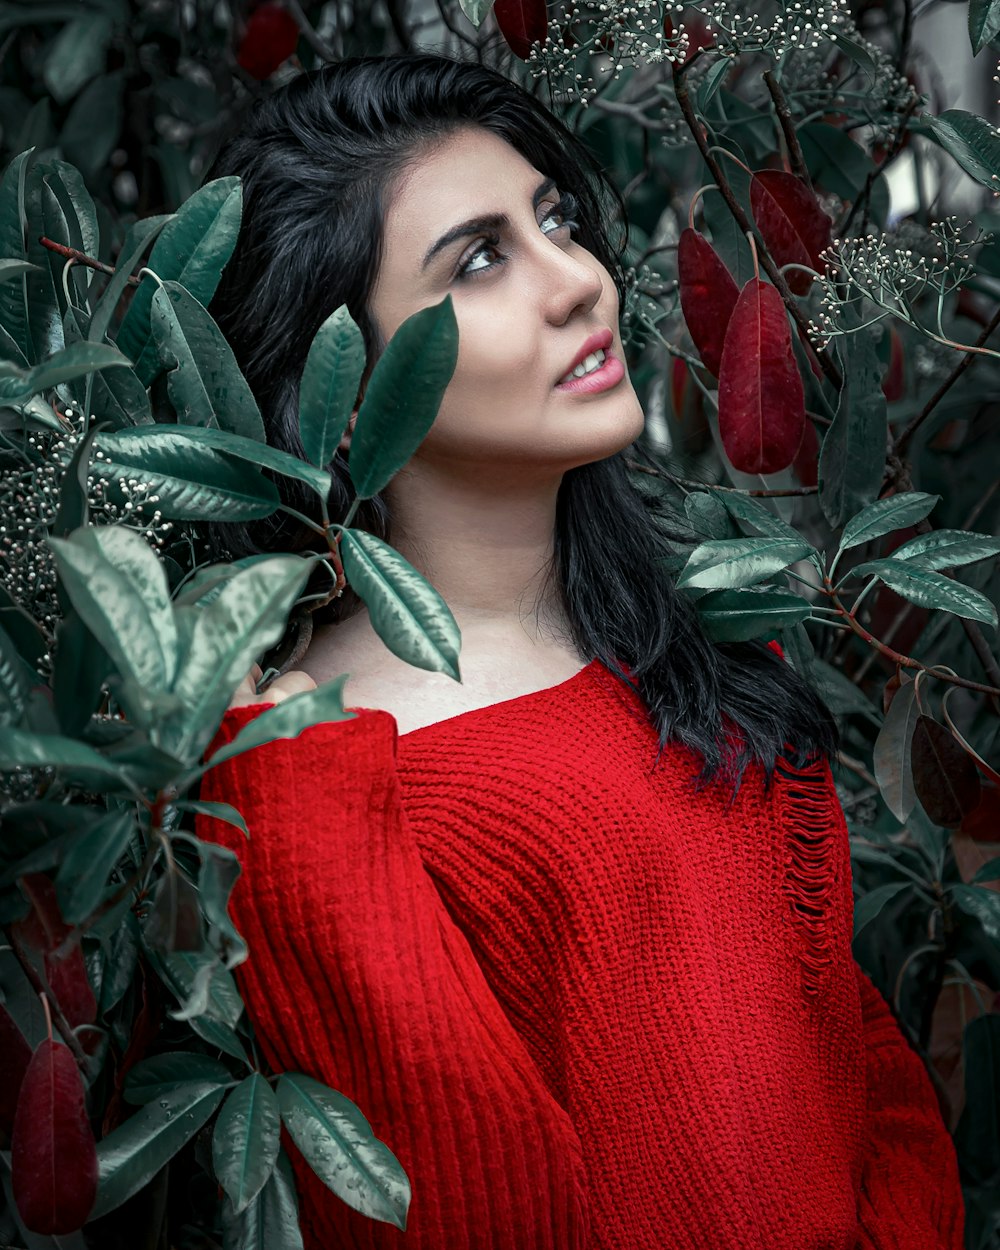 woman in red knit sweater holding green leaves